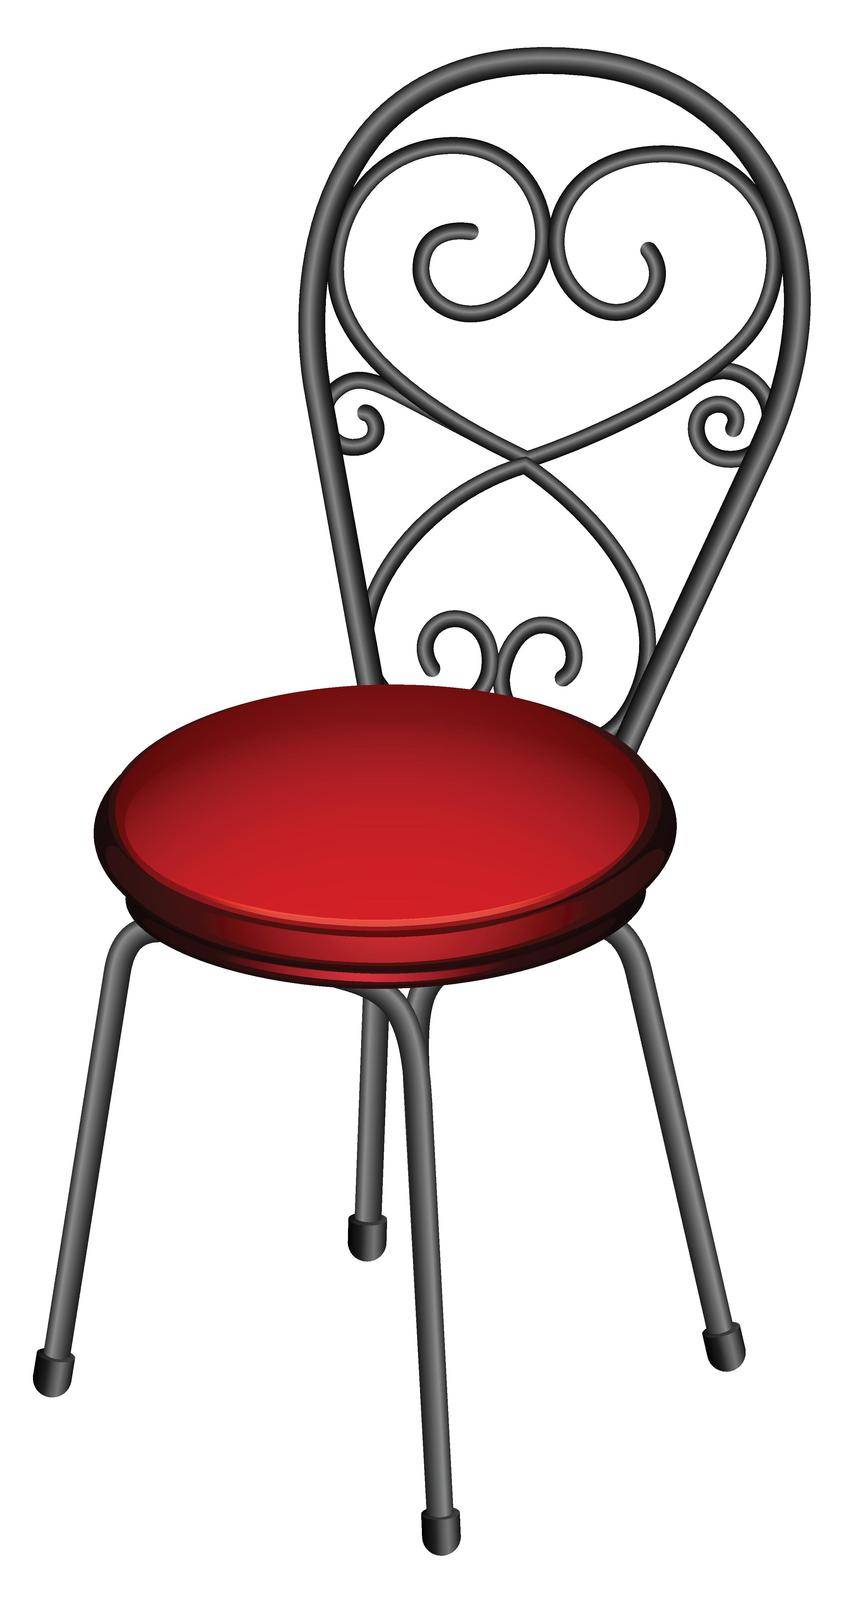 Illustration of a close up chair